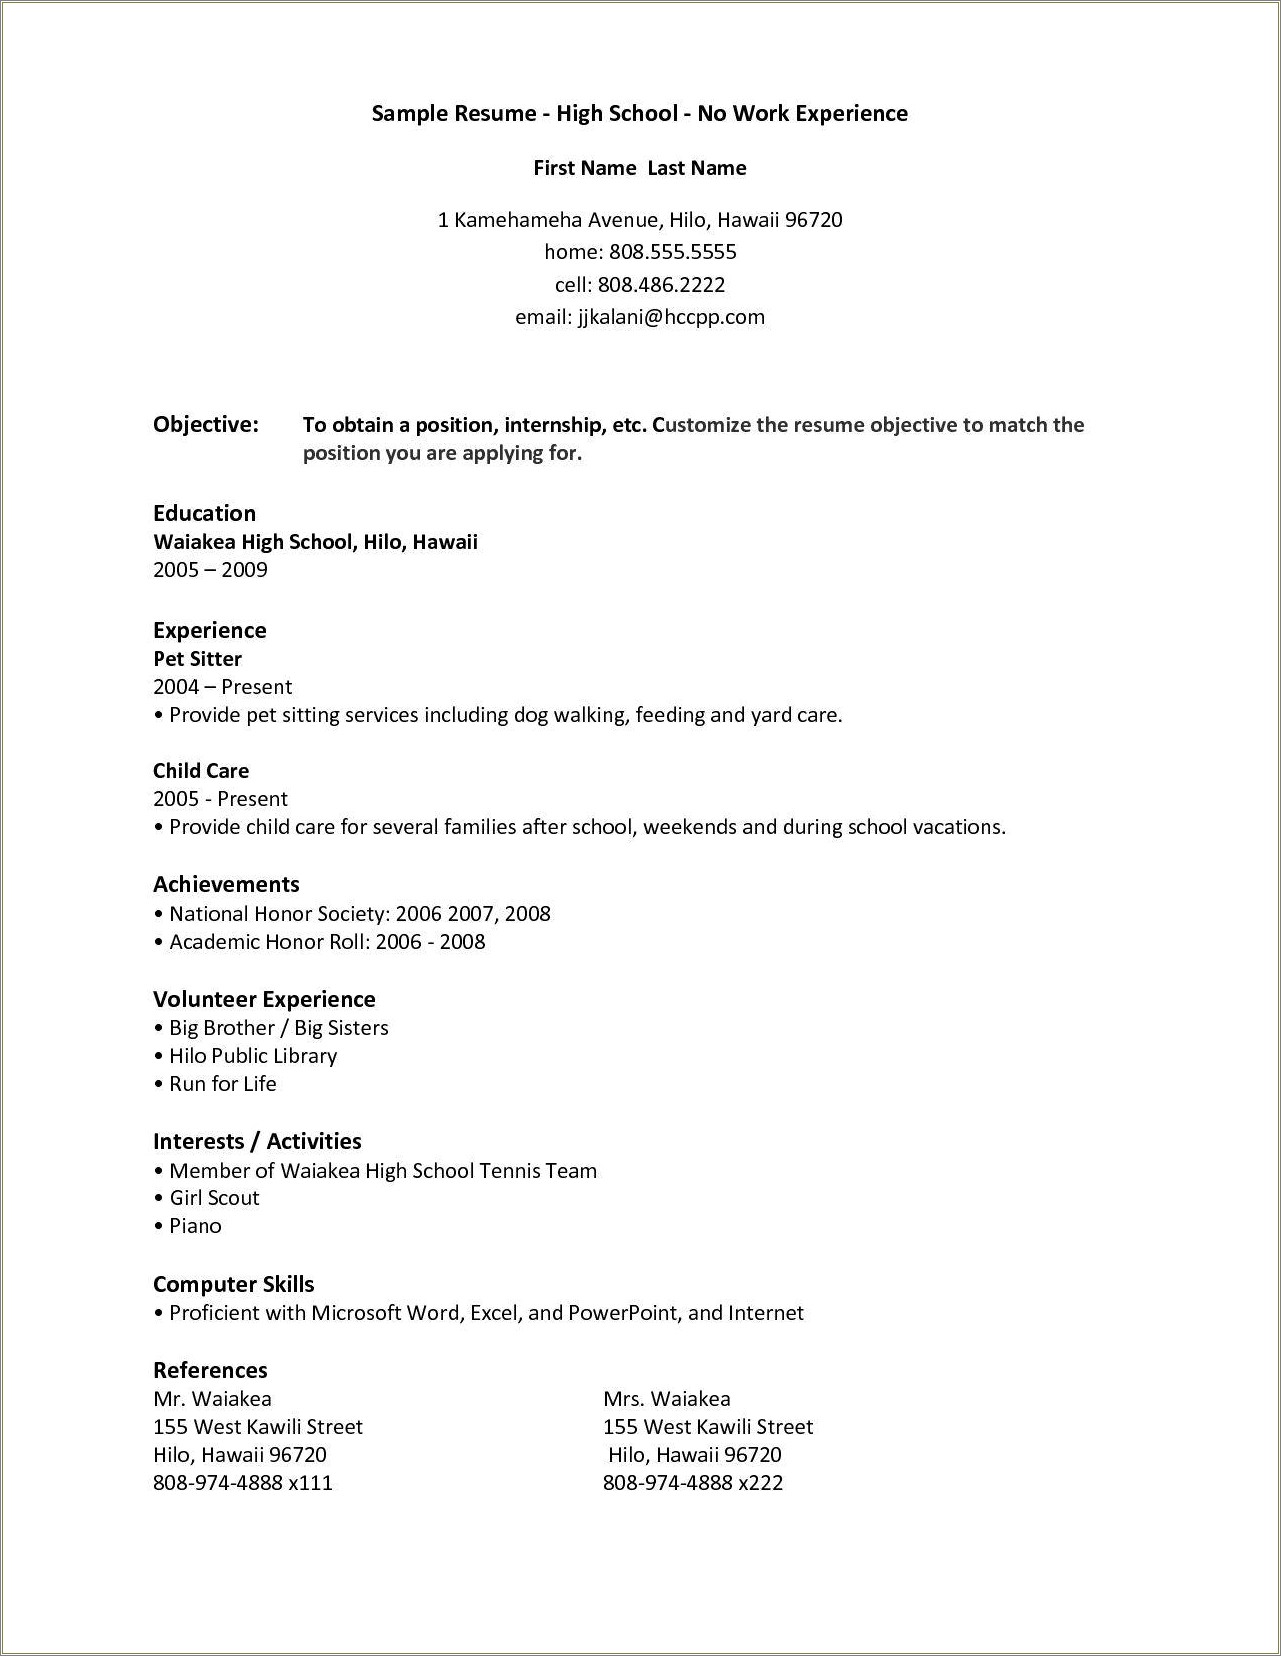 Basic Resume For Students In High School